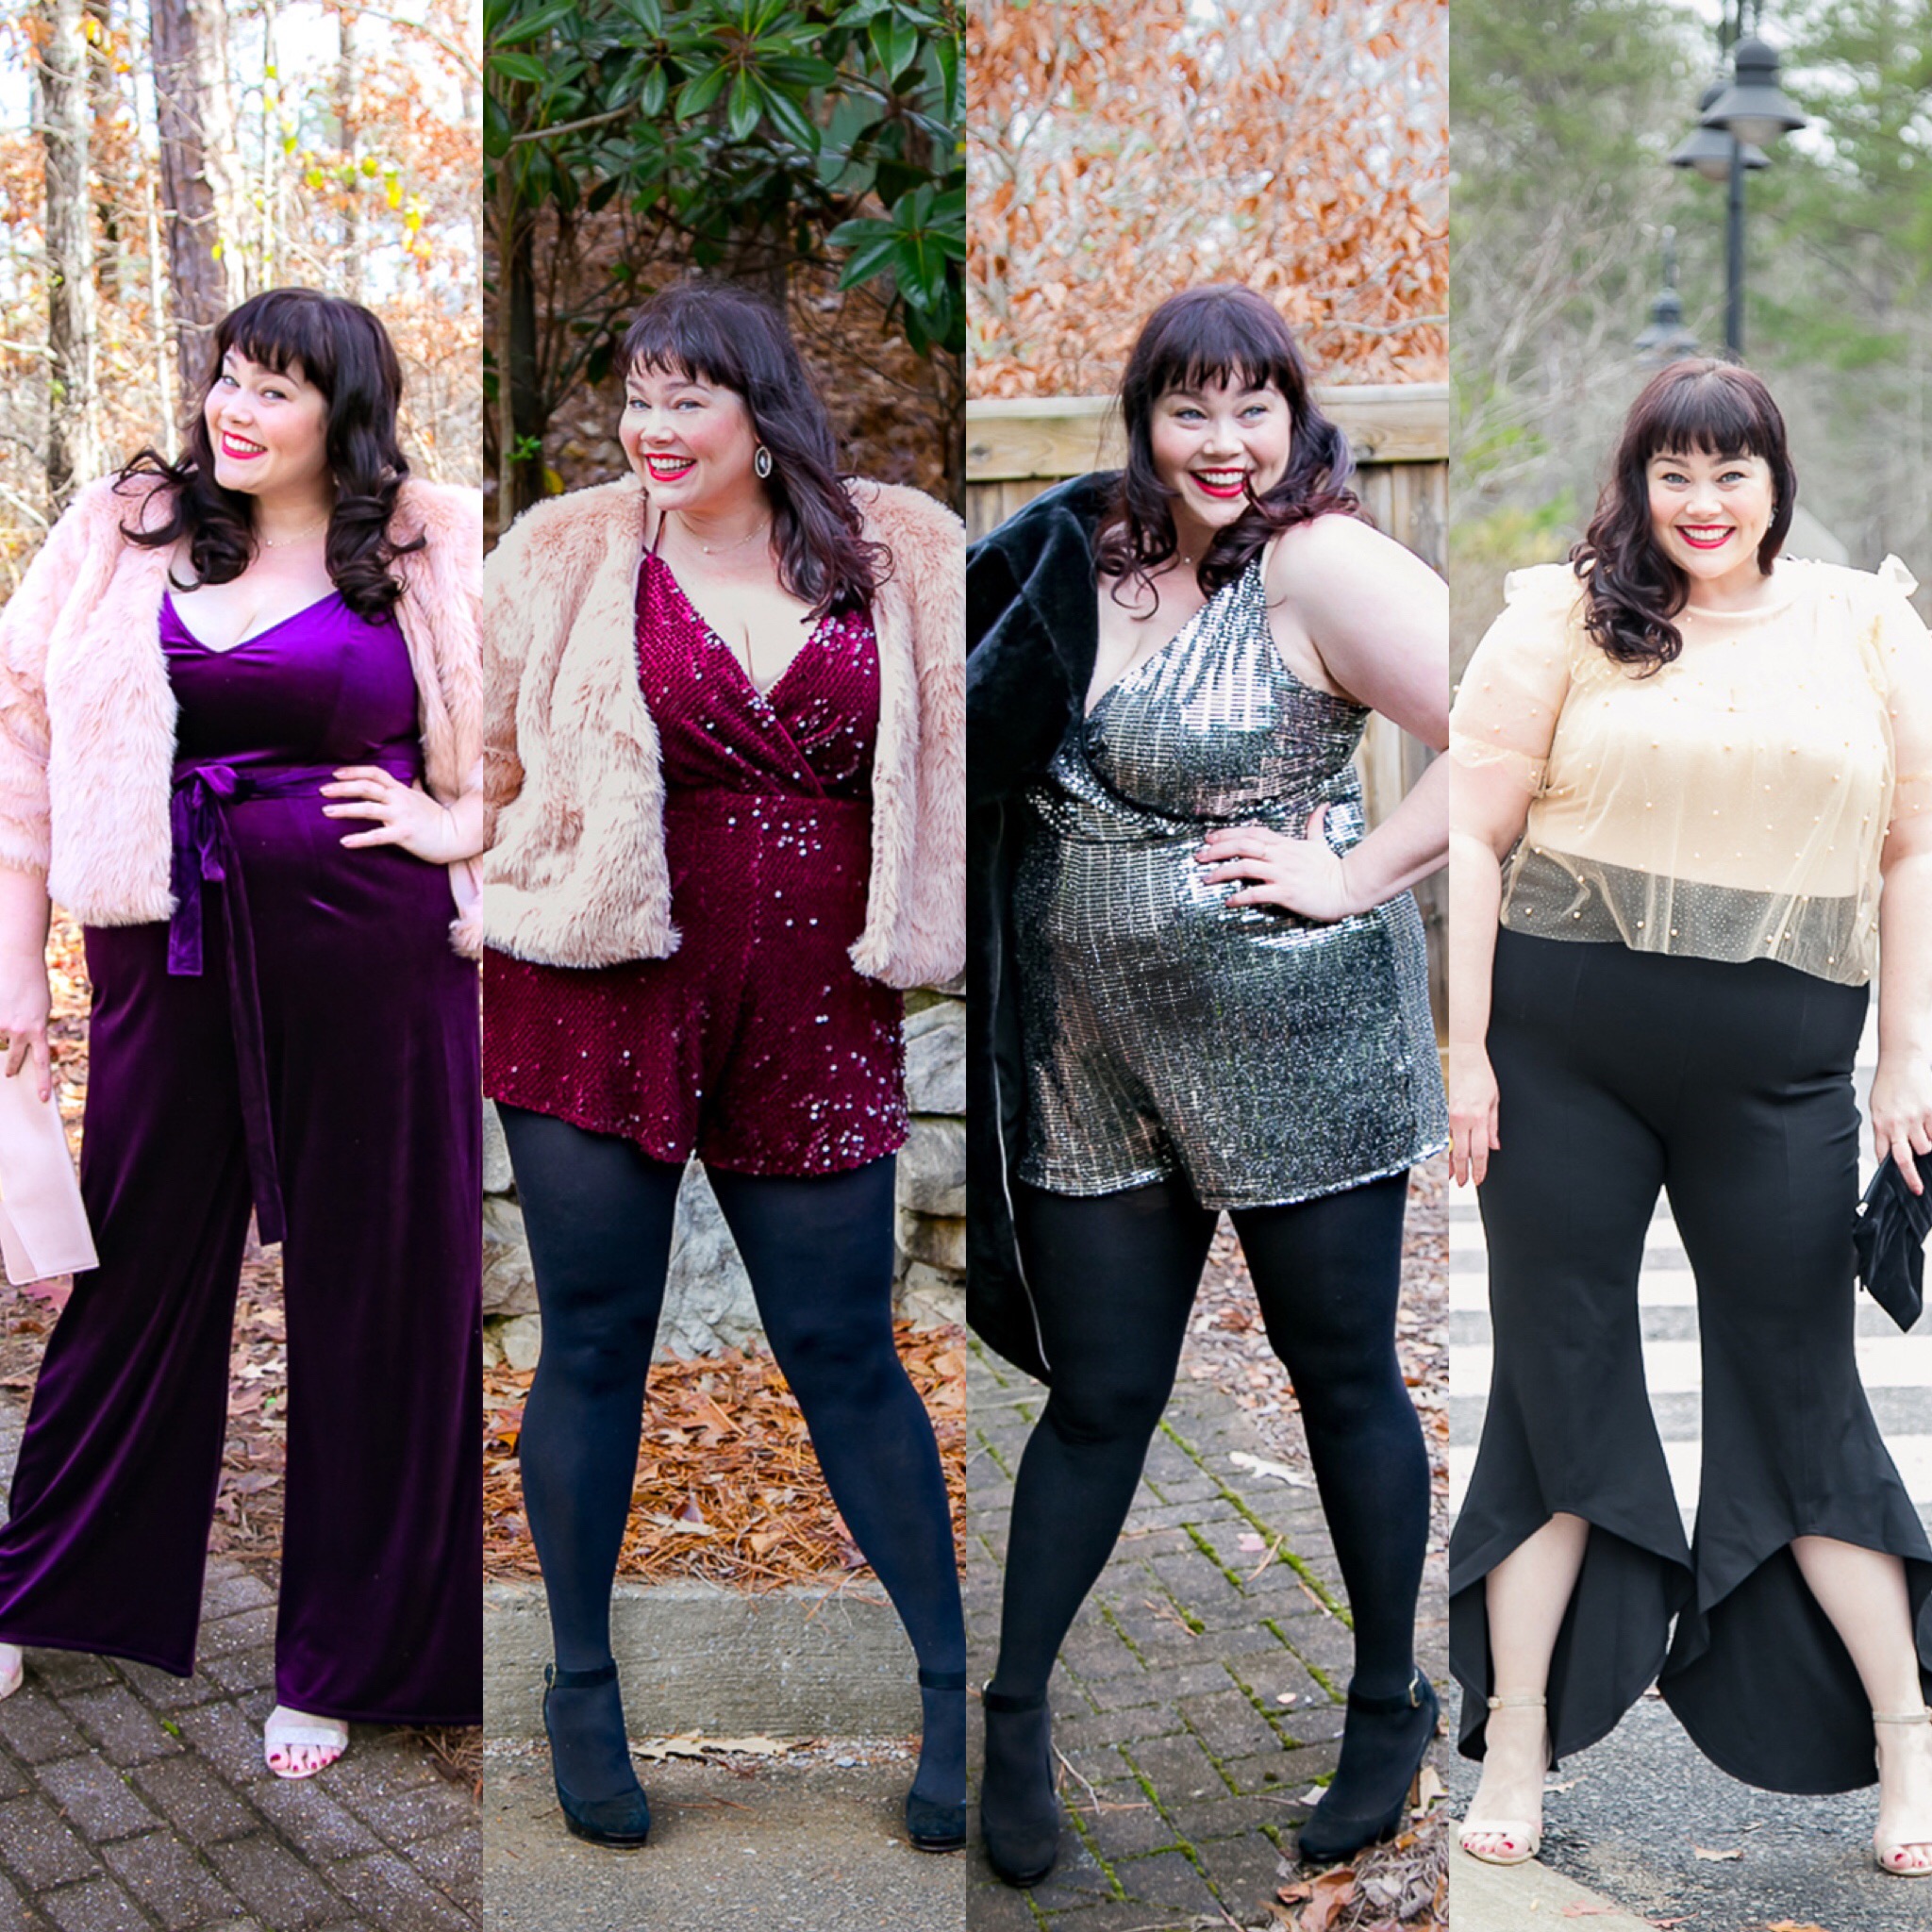 Plus Size NYE Outfit from Forever 21 Plus: 4 Choices